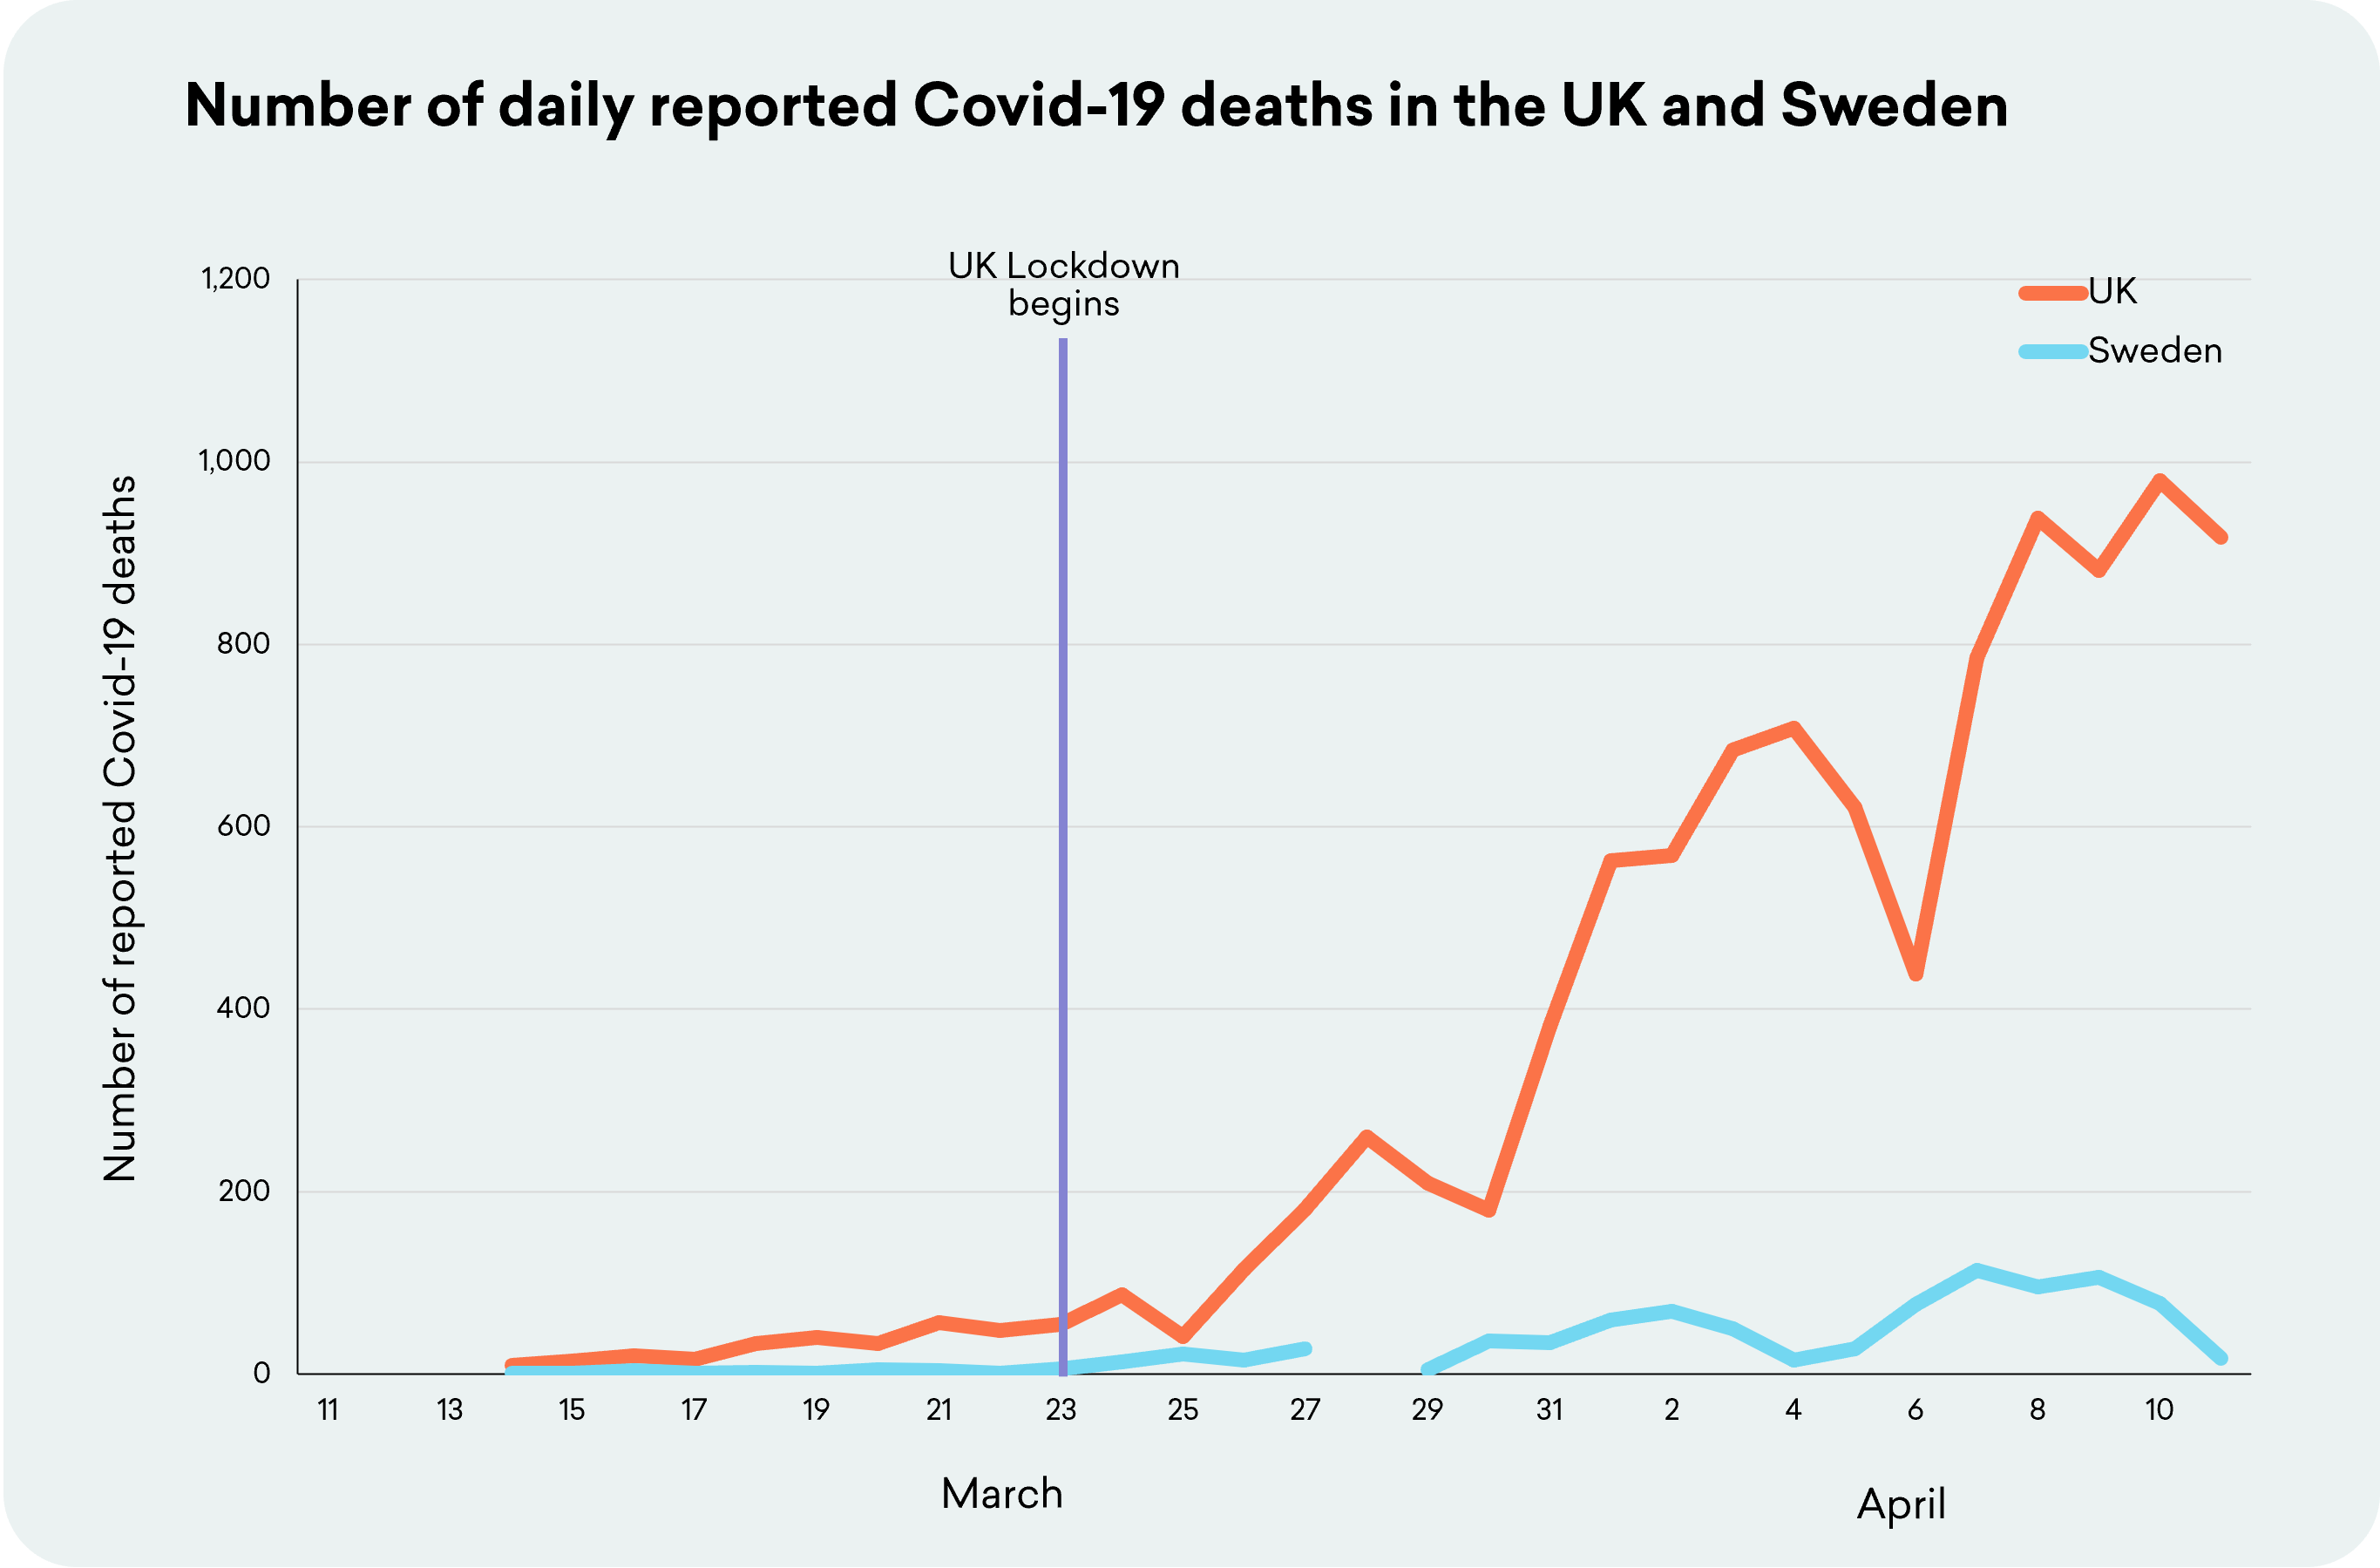 UK and Sweden Covid deaths